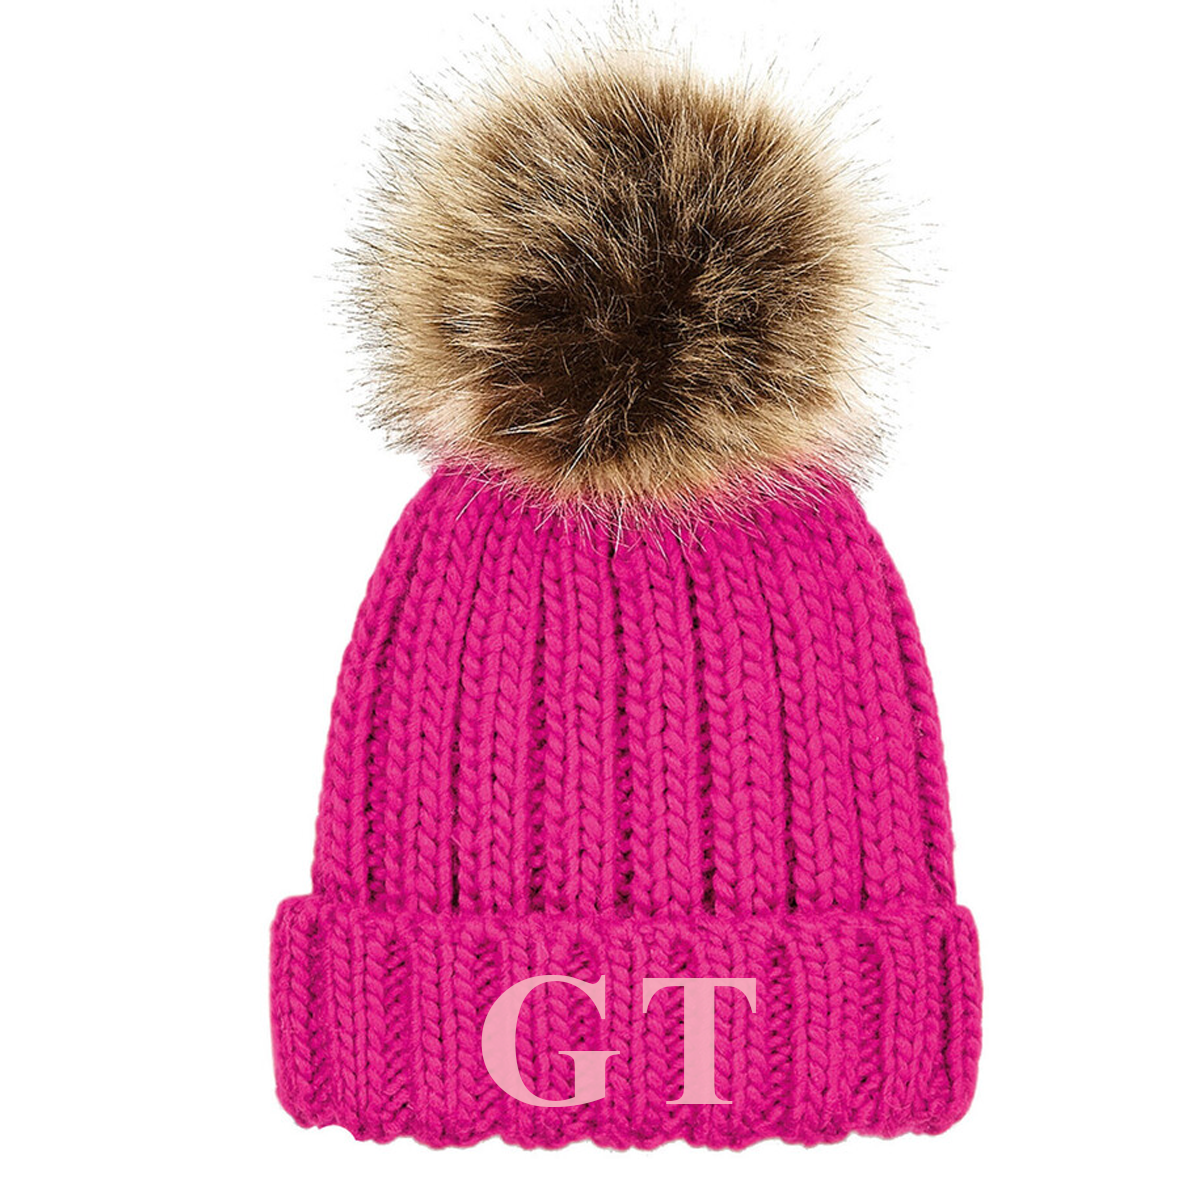 Fuchsia Embroidered Chunky Knit Beanie Hat - Infants, Junior & Adult sizes